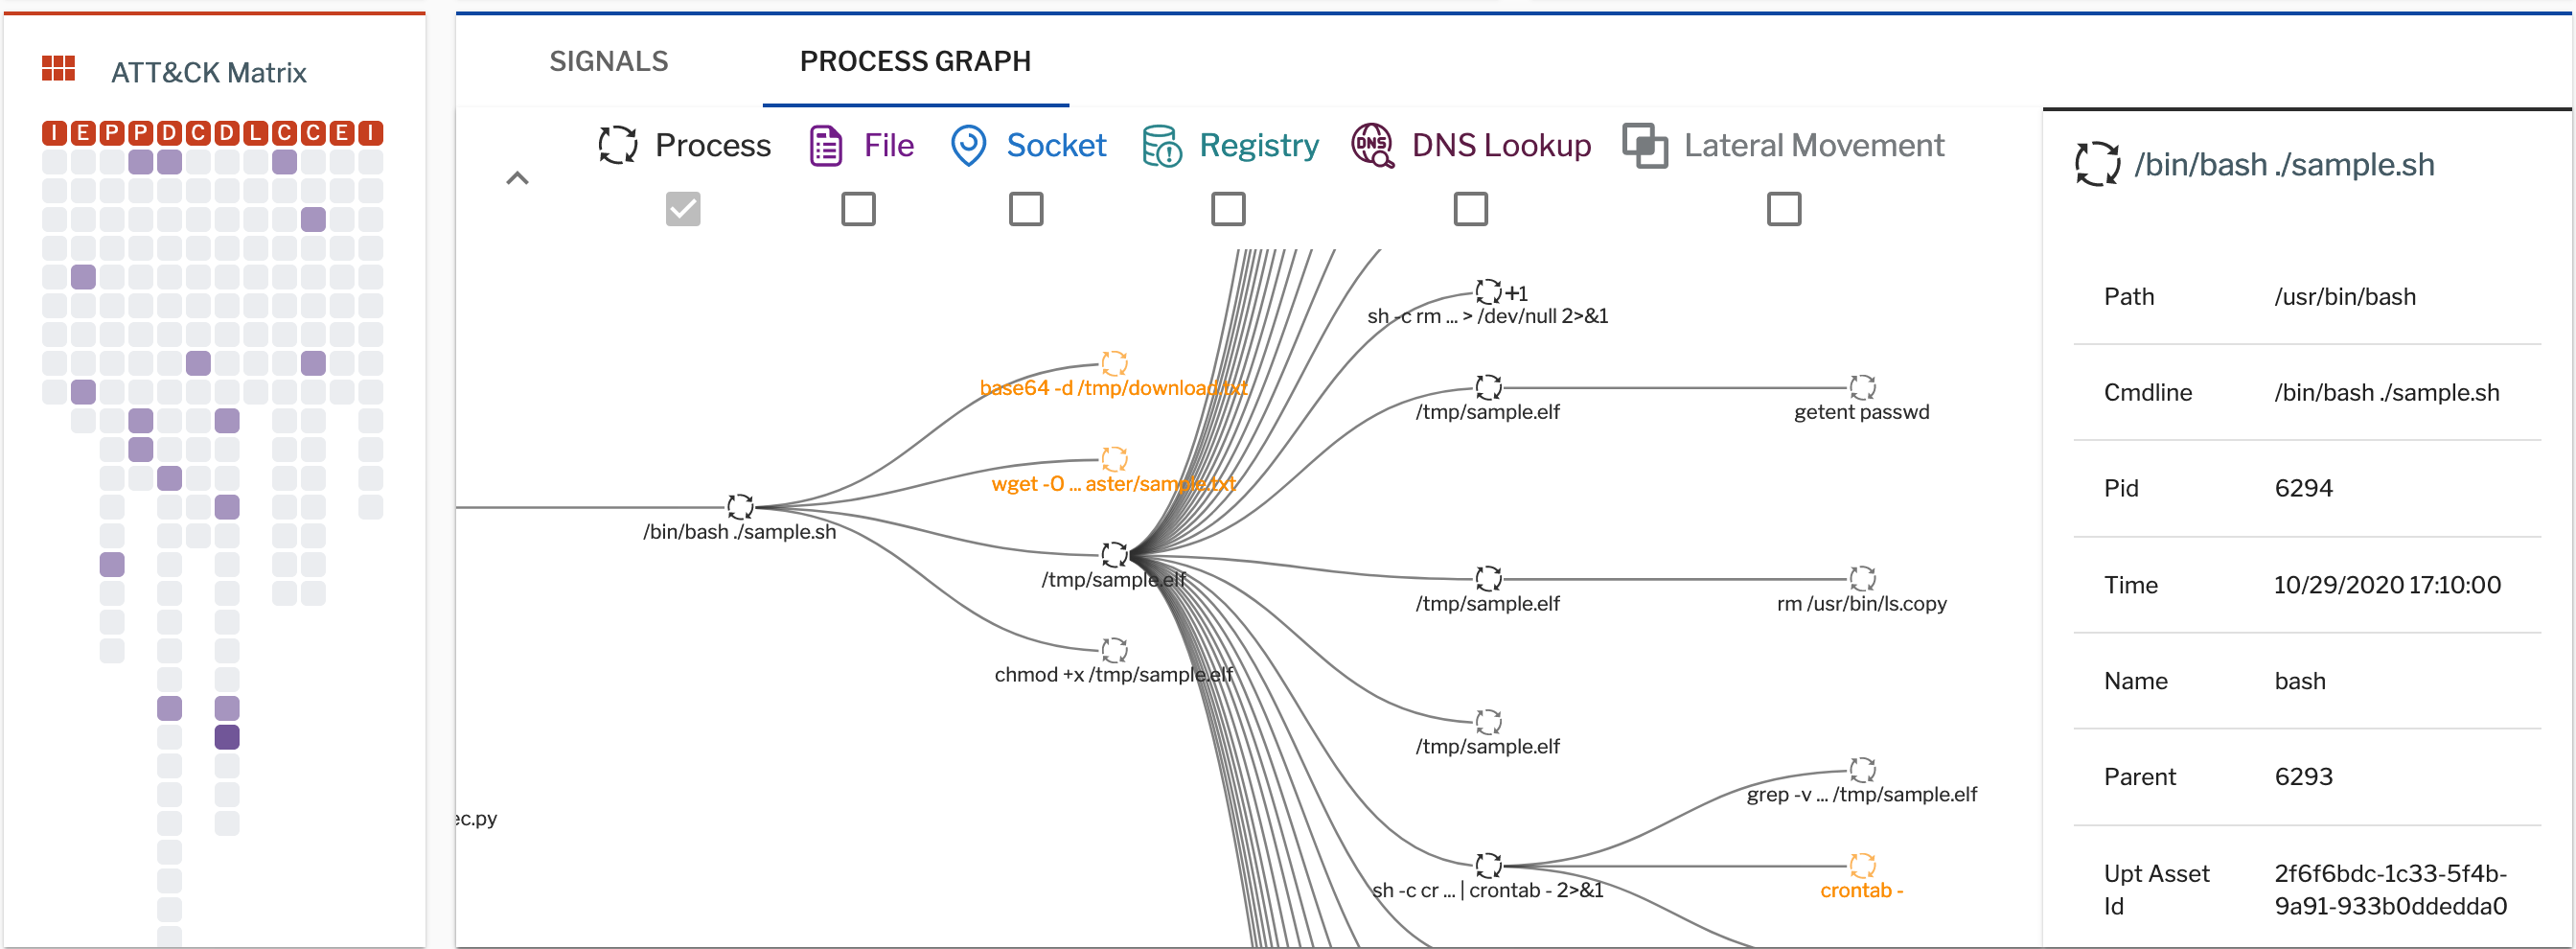 This process graph related to an incident provides visibility inside an attack.